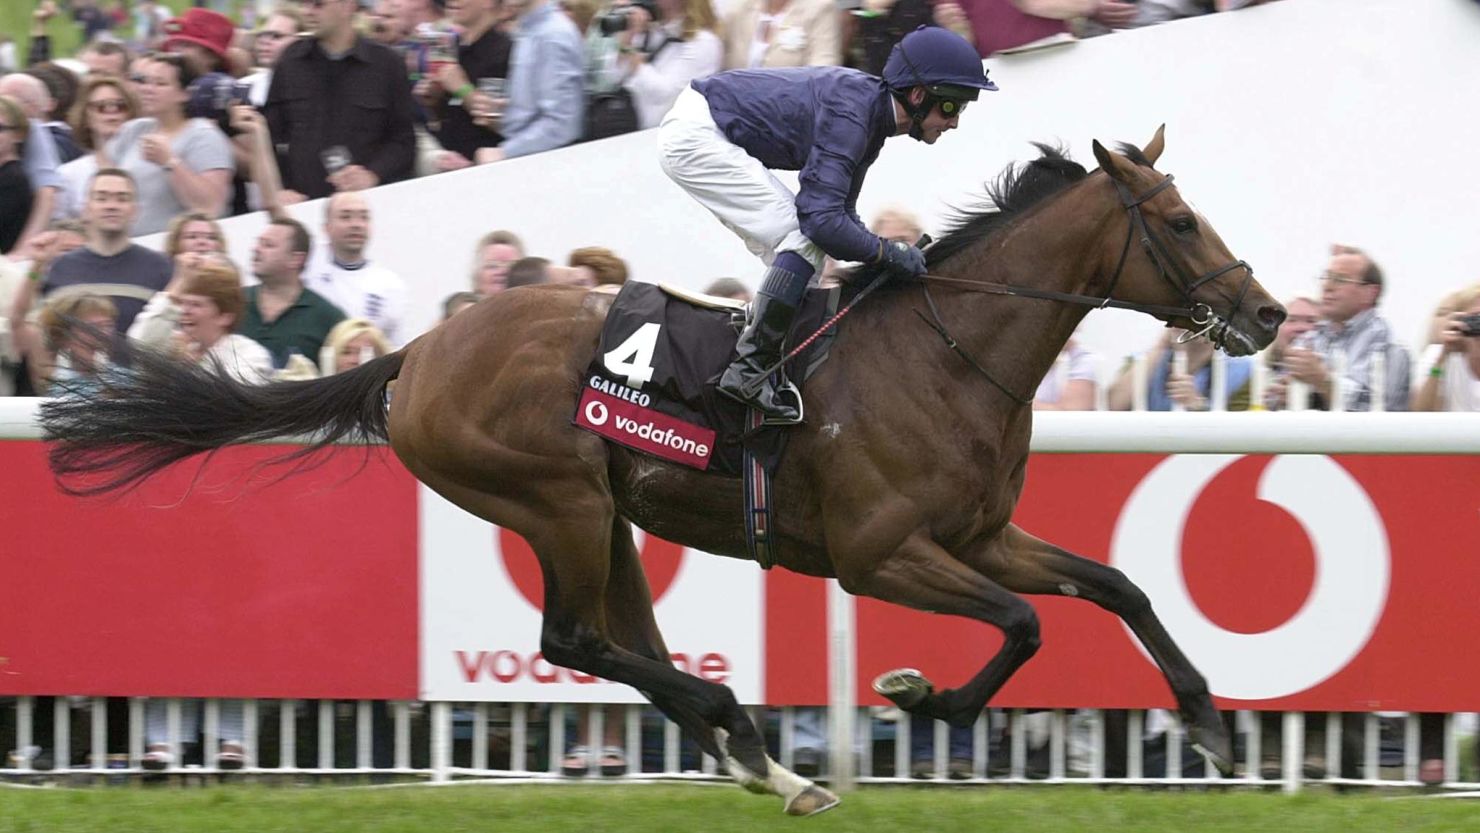 Racehorse Galileo commands a a huge fee for his breeding services. Pictured, winning the Epsom Derby race, in June 2001. 